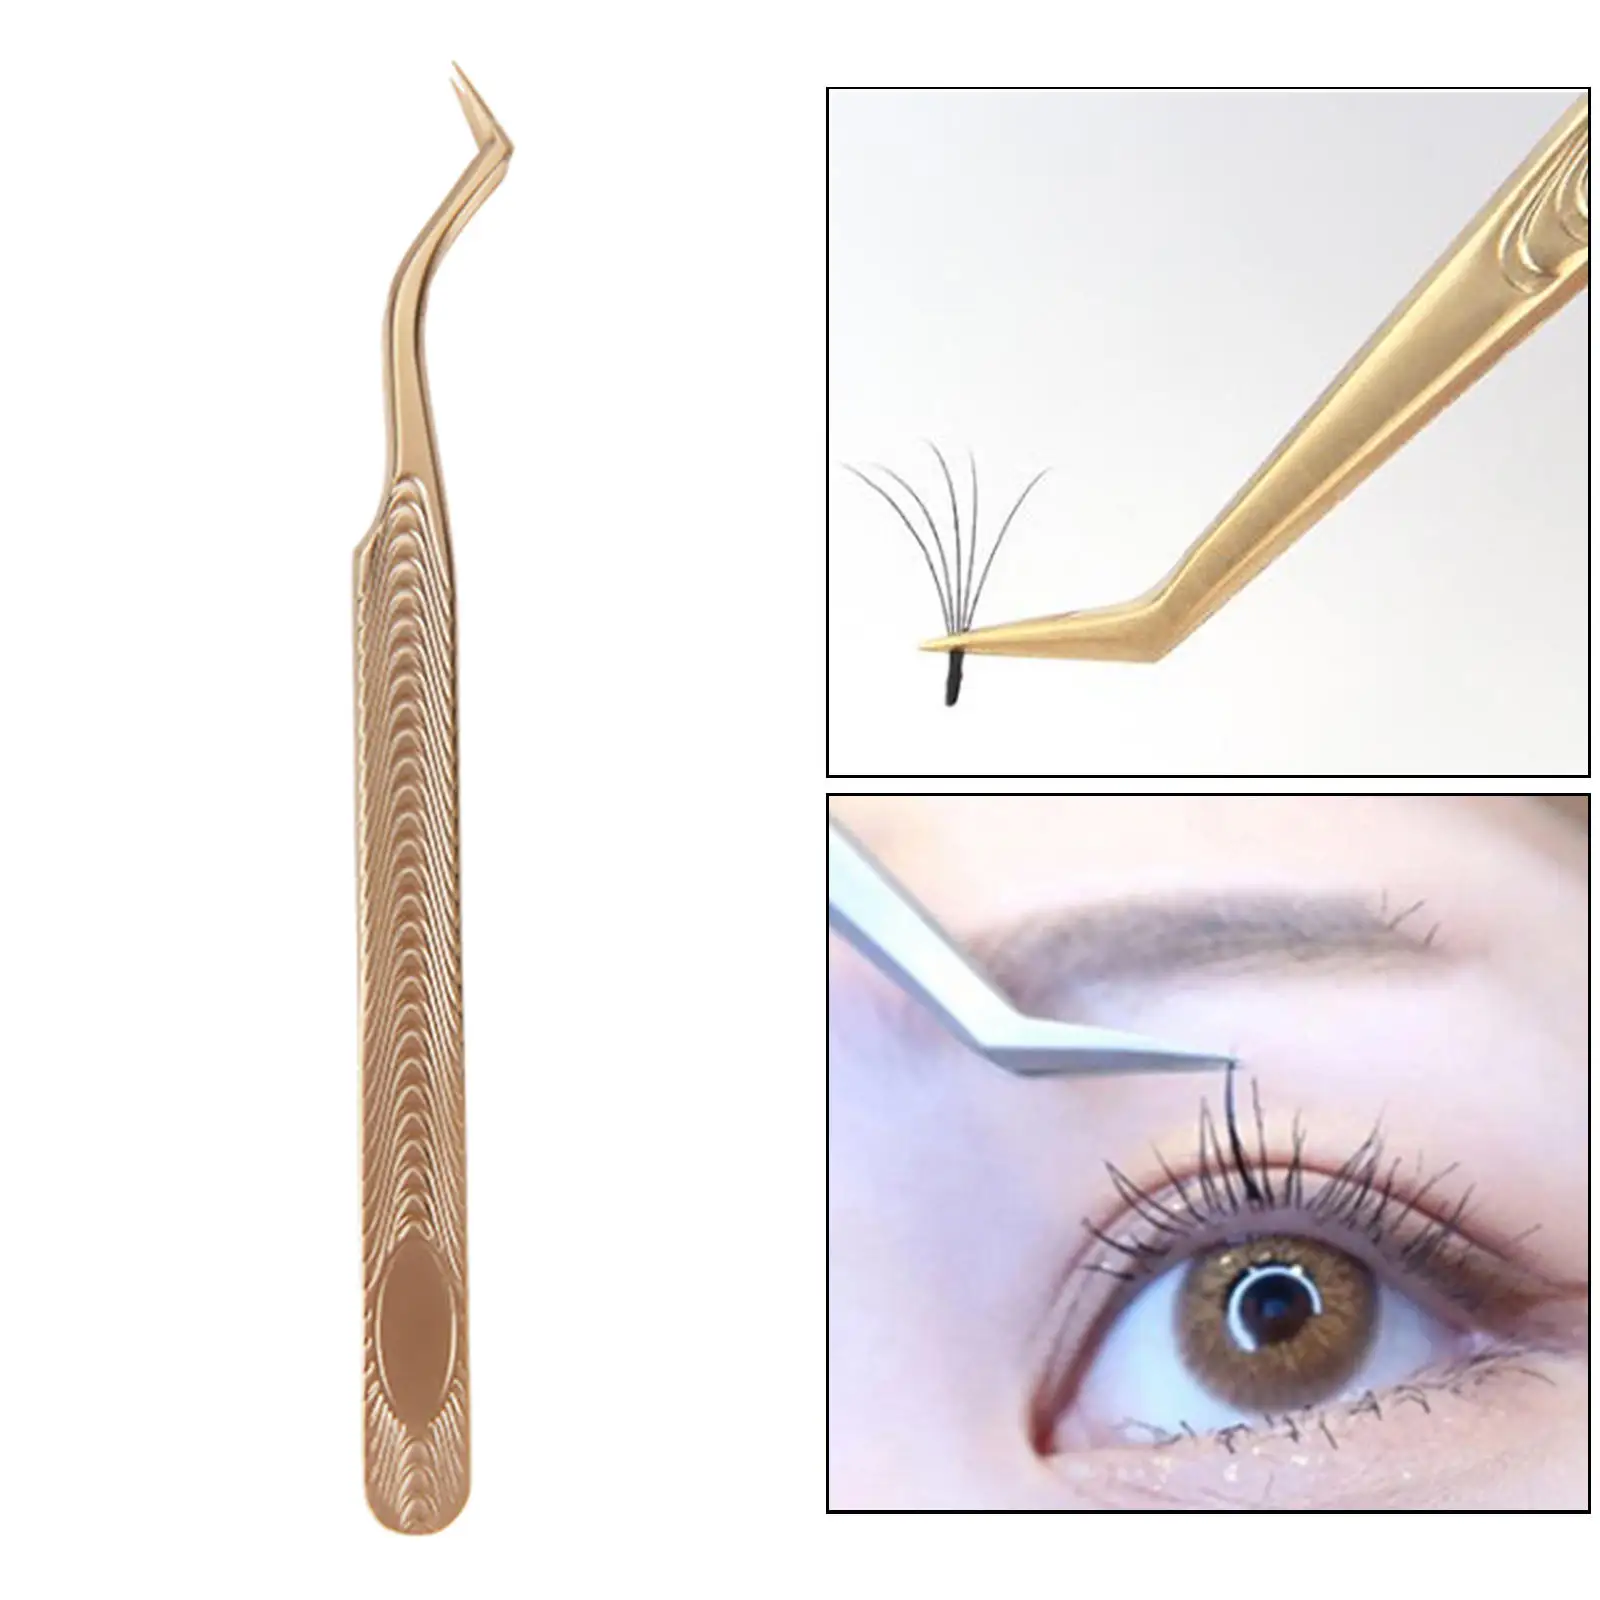 Stainless Steel Eyelash Tweezers Eyelash Applicator Tool Straight and Curved Tip for Volume Isolation Lashes Lash Extension